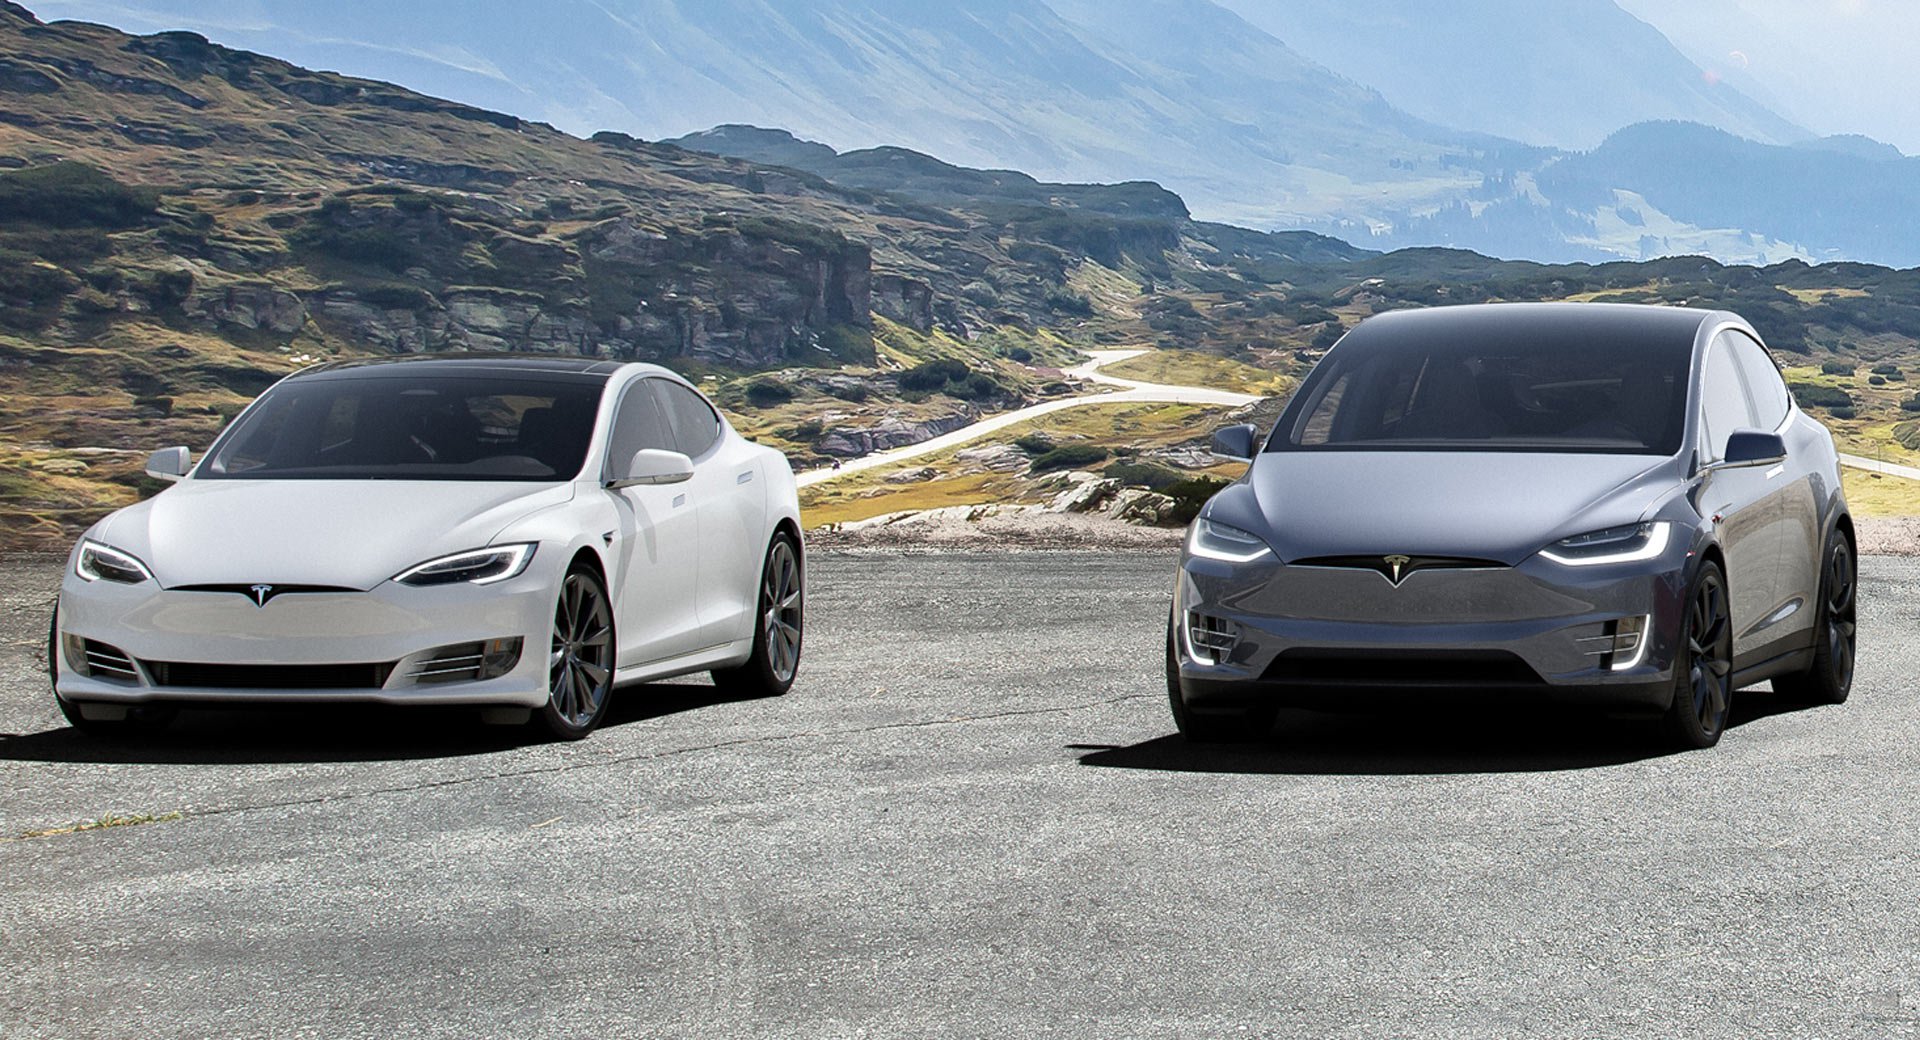 Tesla Insurance Launches In California, Aims To Save Owners Up To 30%